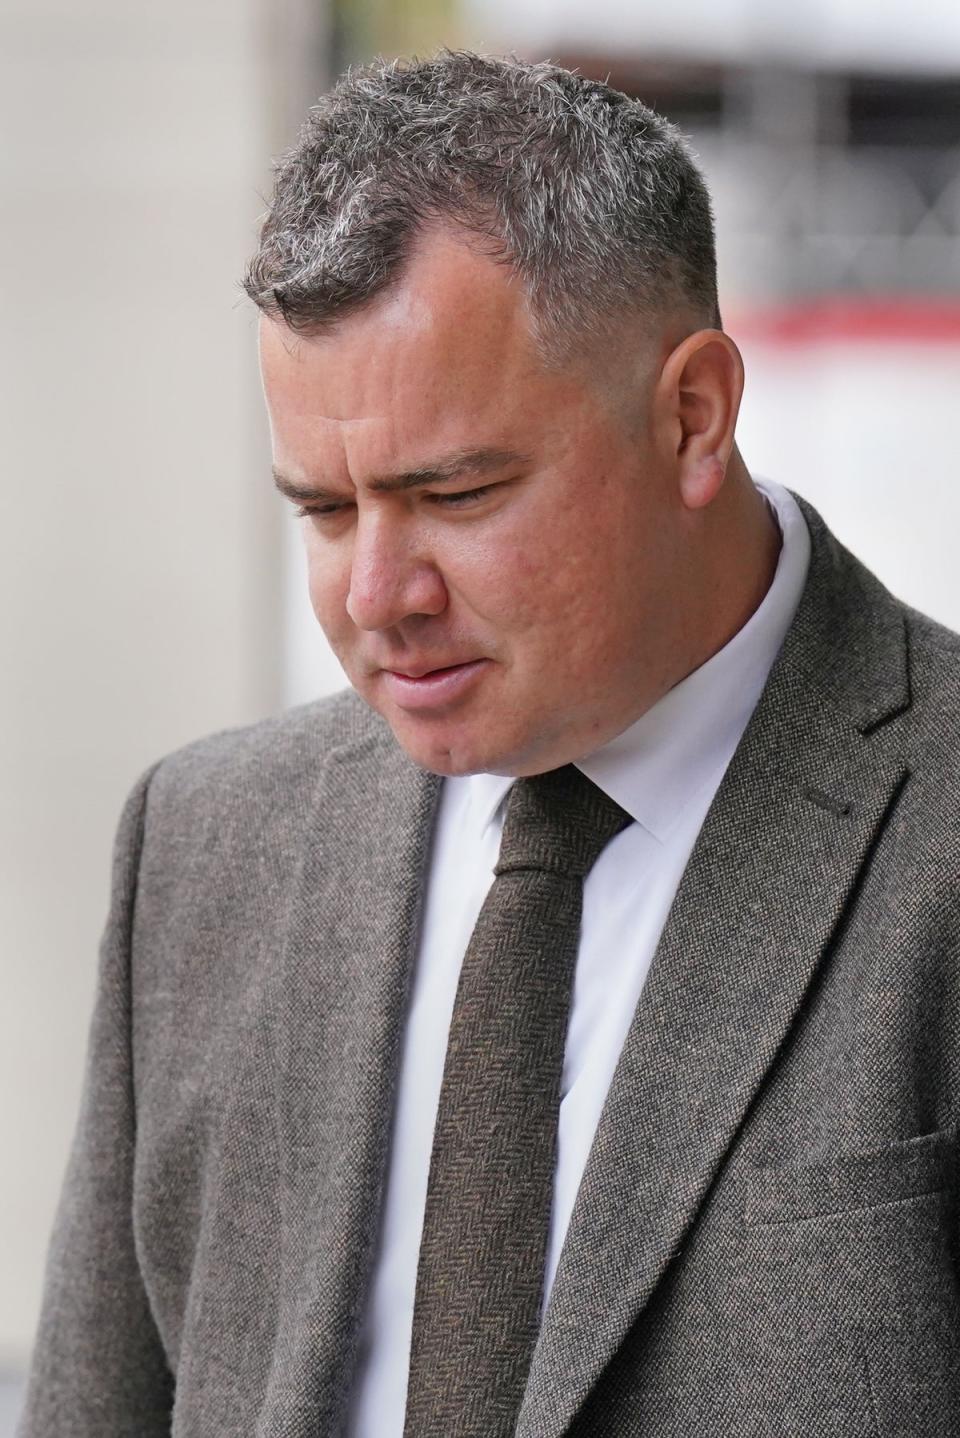 PC Jonathan Marsh had punched the medical worker to the back of the head (Jonathan Brady/PA Wire)